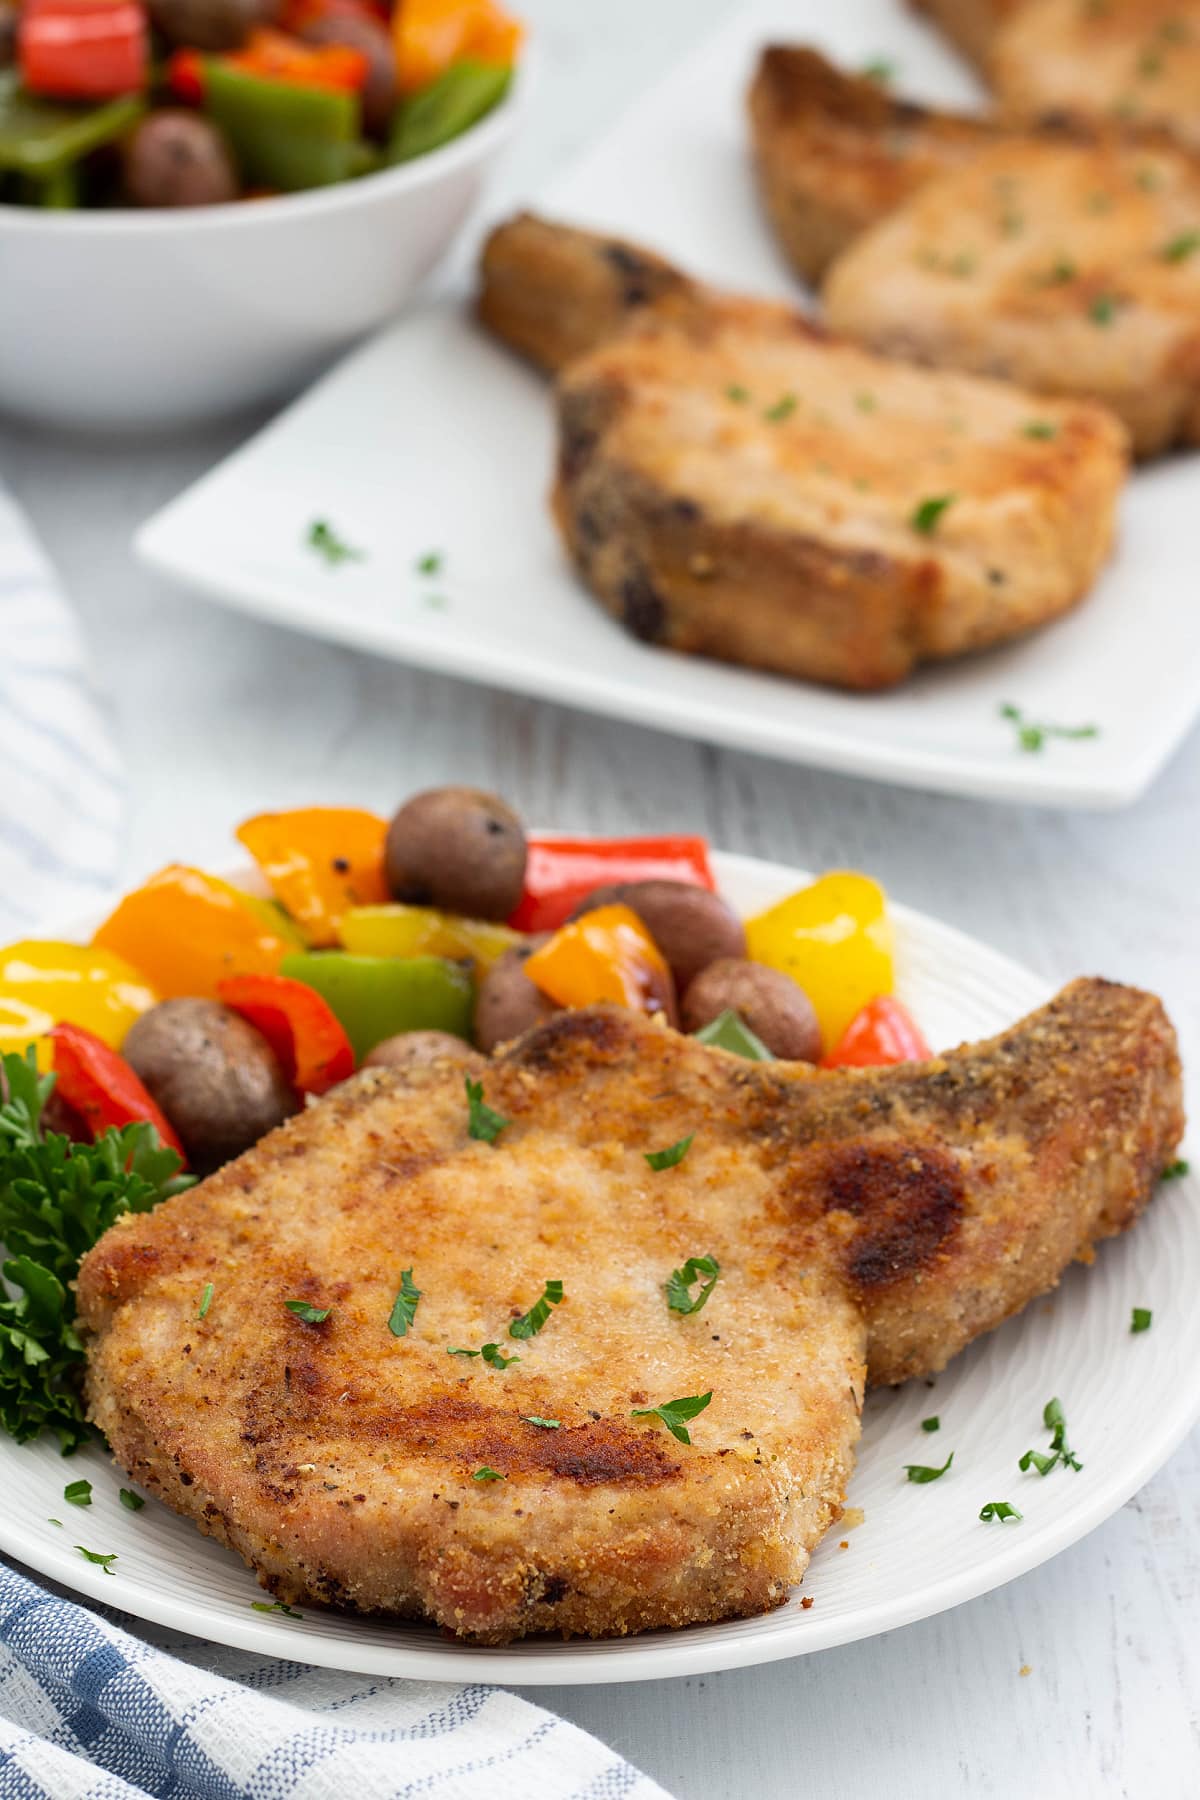 Shake and bake pork chops with vegetables